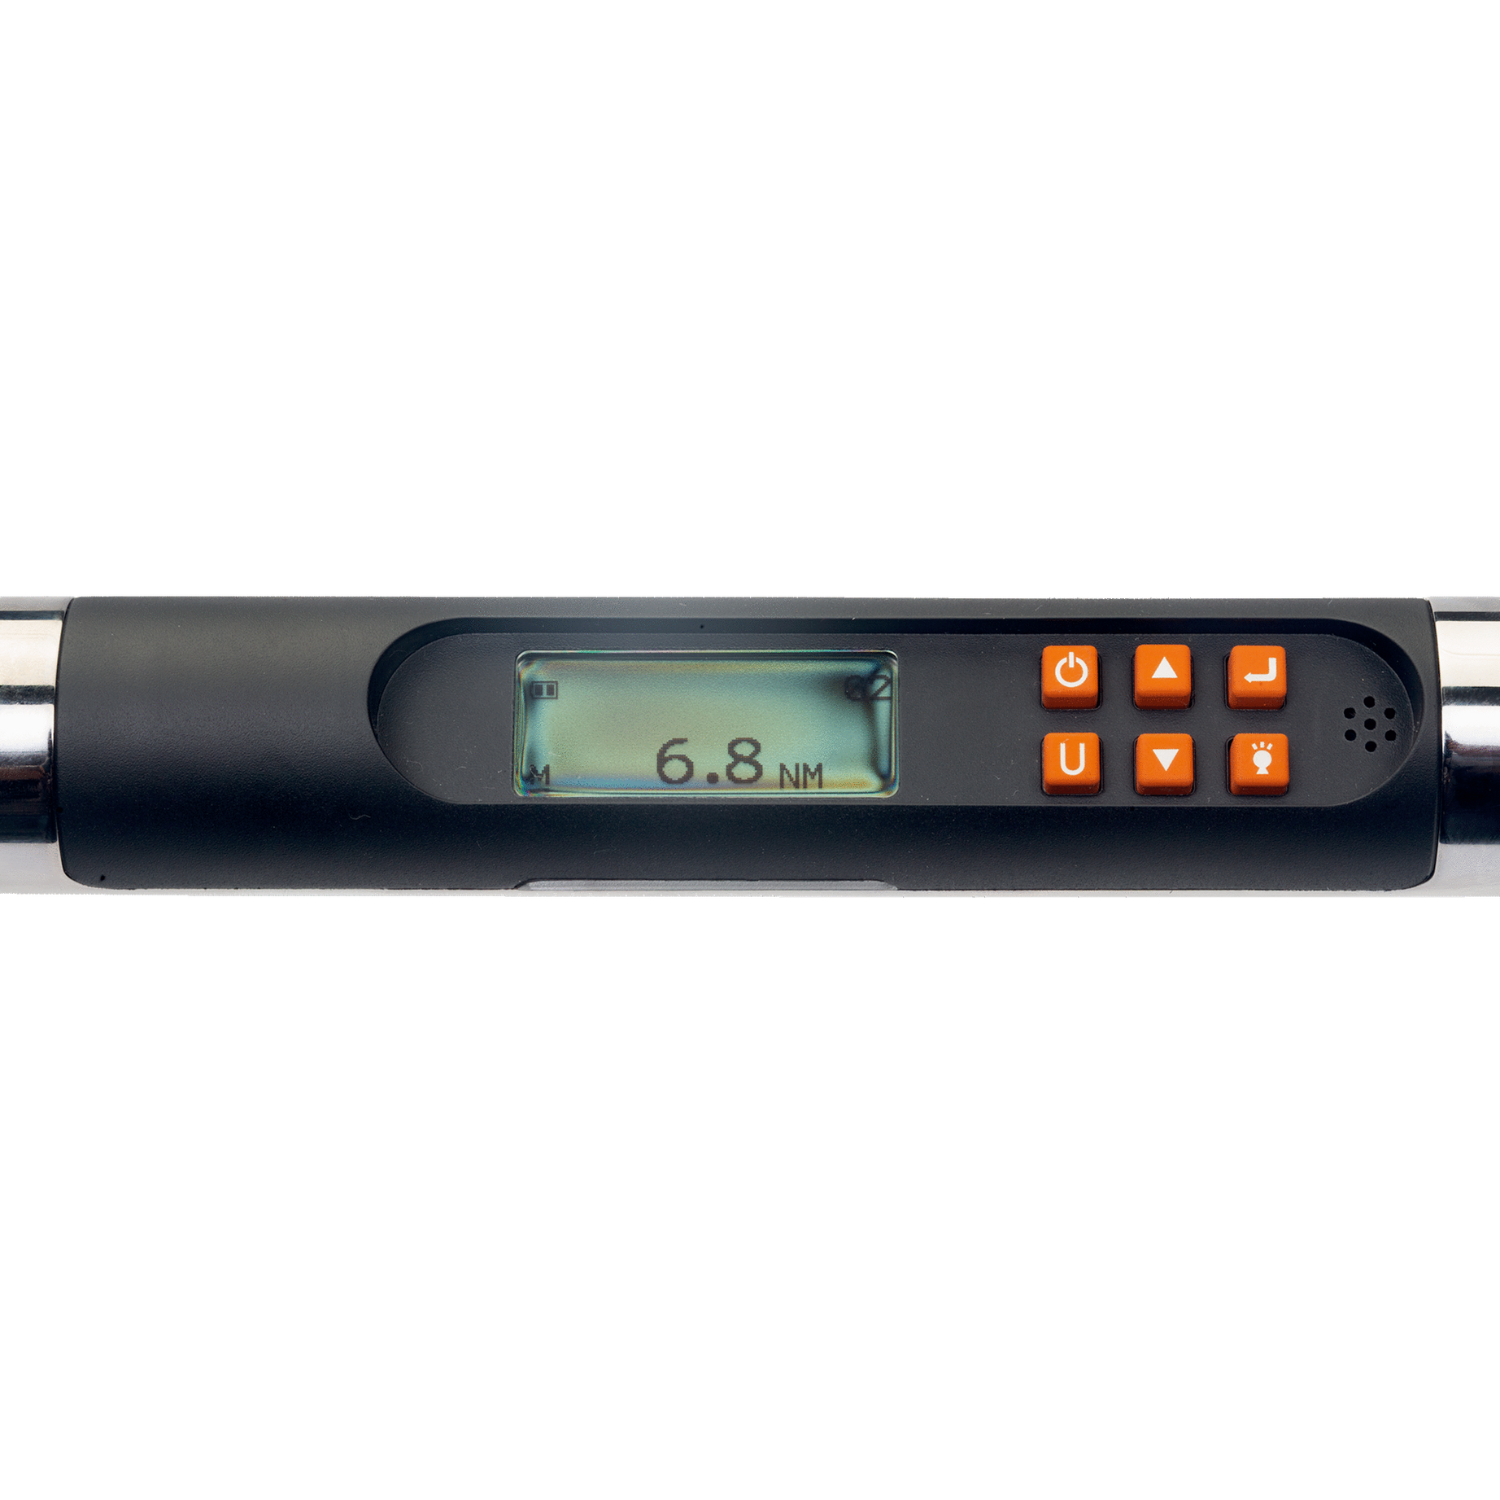 BAHCO TAWMB14_24 Digital Torque Wrench with Memory (BAHCO Tools) - Premium Torque Wrench from BAHCO - Shop now at Yew Aik.